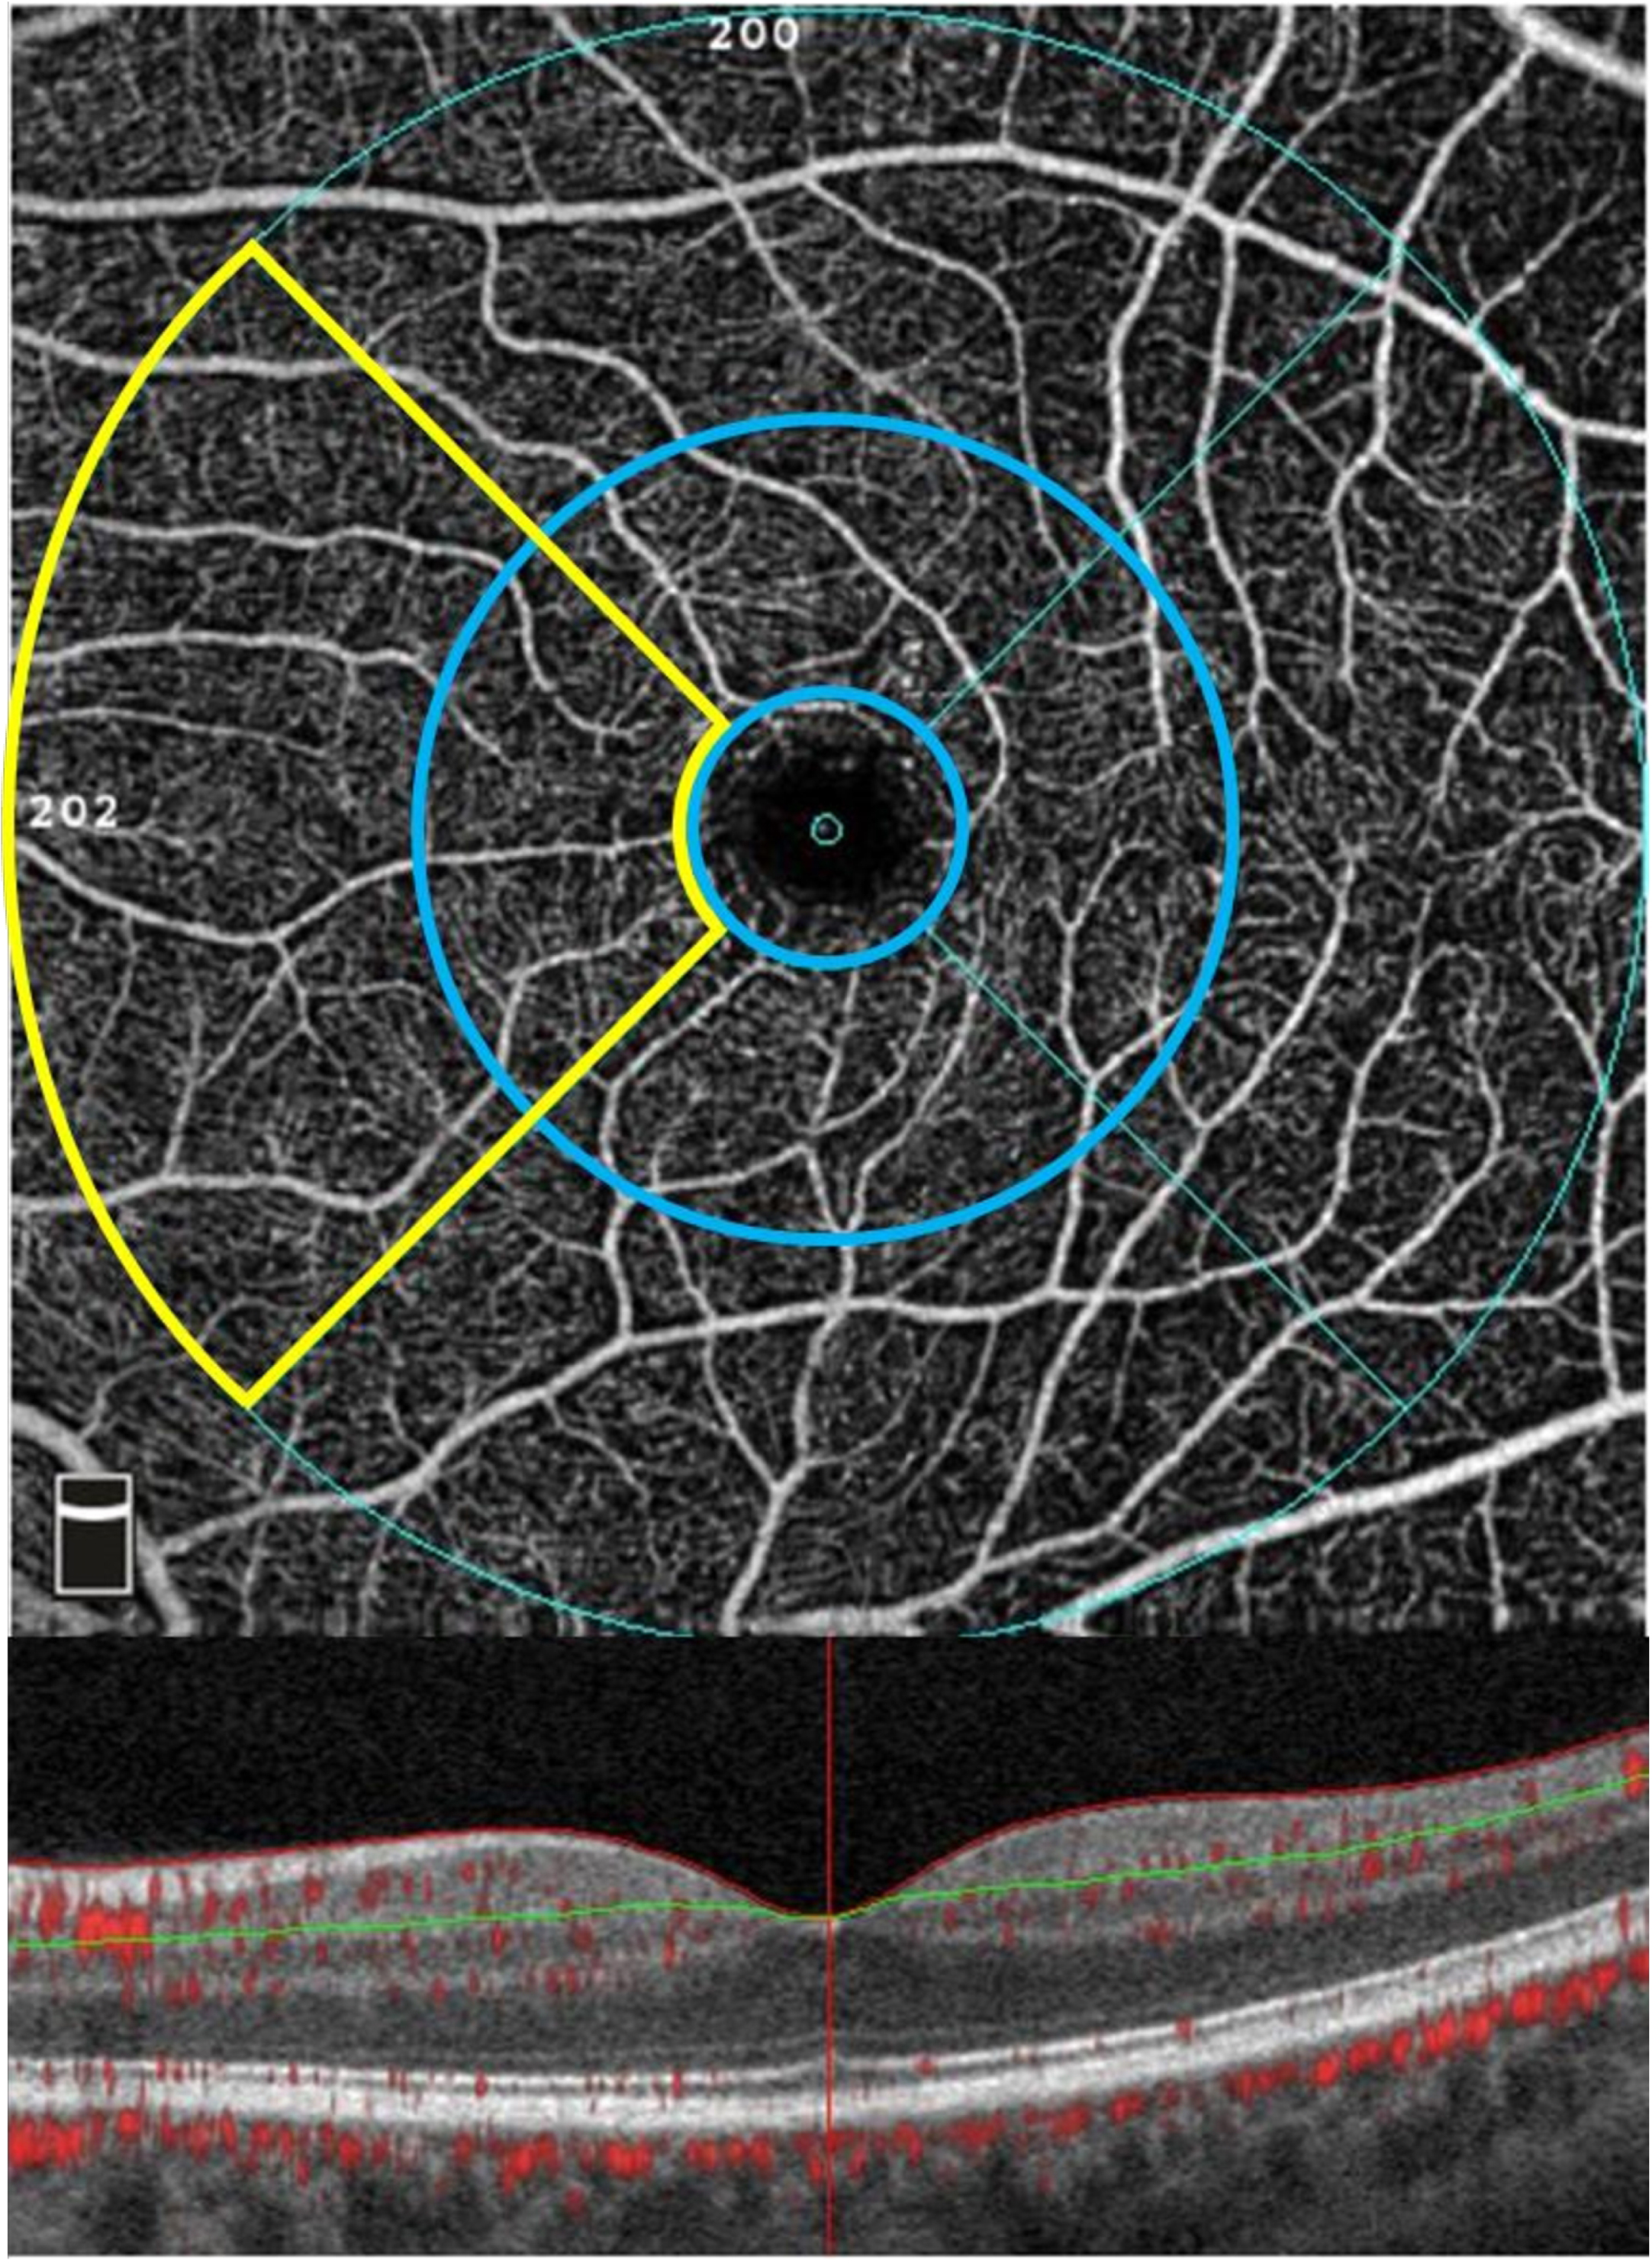 OCT angiography of the macular regions affected in hereditary spastic paraplegia. Superficial parafoveal (inner circular area outside of foveal avascular zone highlighted in blue, upper en face image) and perifoveal (outer circular area, upper en face image) capillary network extending from the internal limiting membrane (red line, lower B-scan image) to the outer boundary of the inner plexiform layer (green line, lower B-scan image). Nasal region (combined parafoveal and perifoveal average) of the nasal superficial vascular plexus (nSVP) highlighted in yellow.